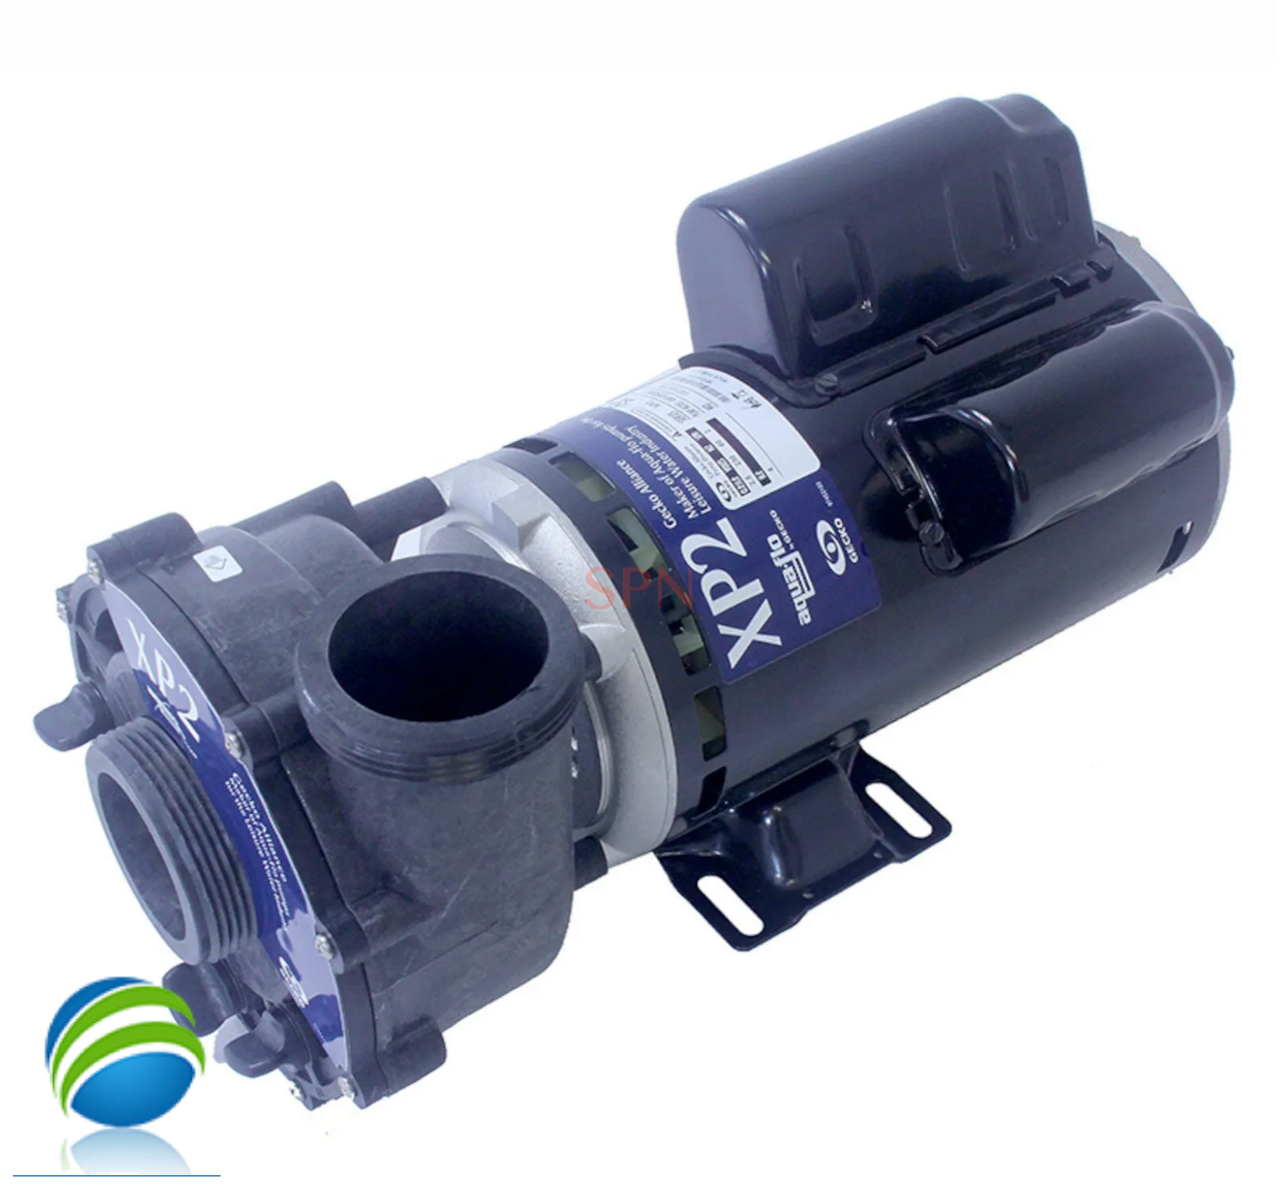 Complete Pump, 37334, Watkins, Vendor Code 4081 or 03338, Solana, Hot Spot, 1.0HP, 115v, 10.5/3.2A, 48 frame, 2"x 2", 1 or 2 Speed
The inlet and outlet measures about 3" across the threads.